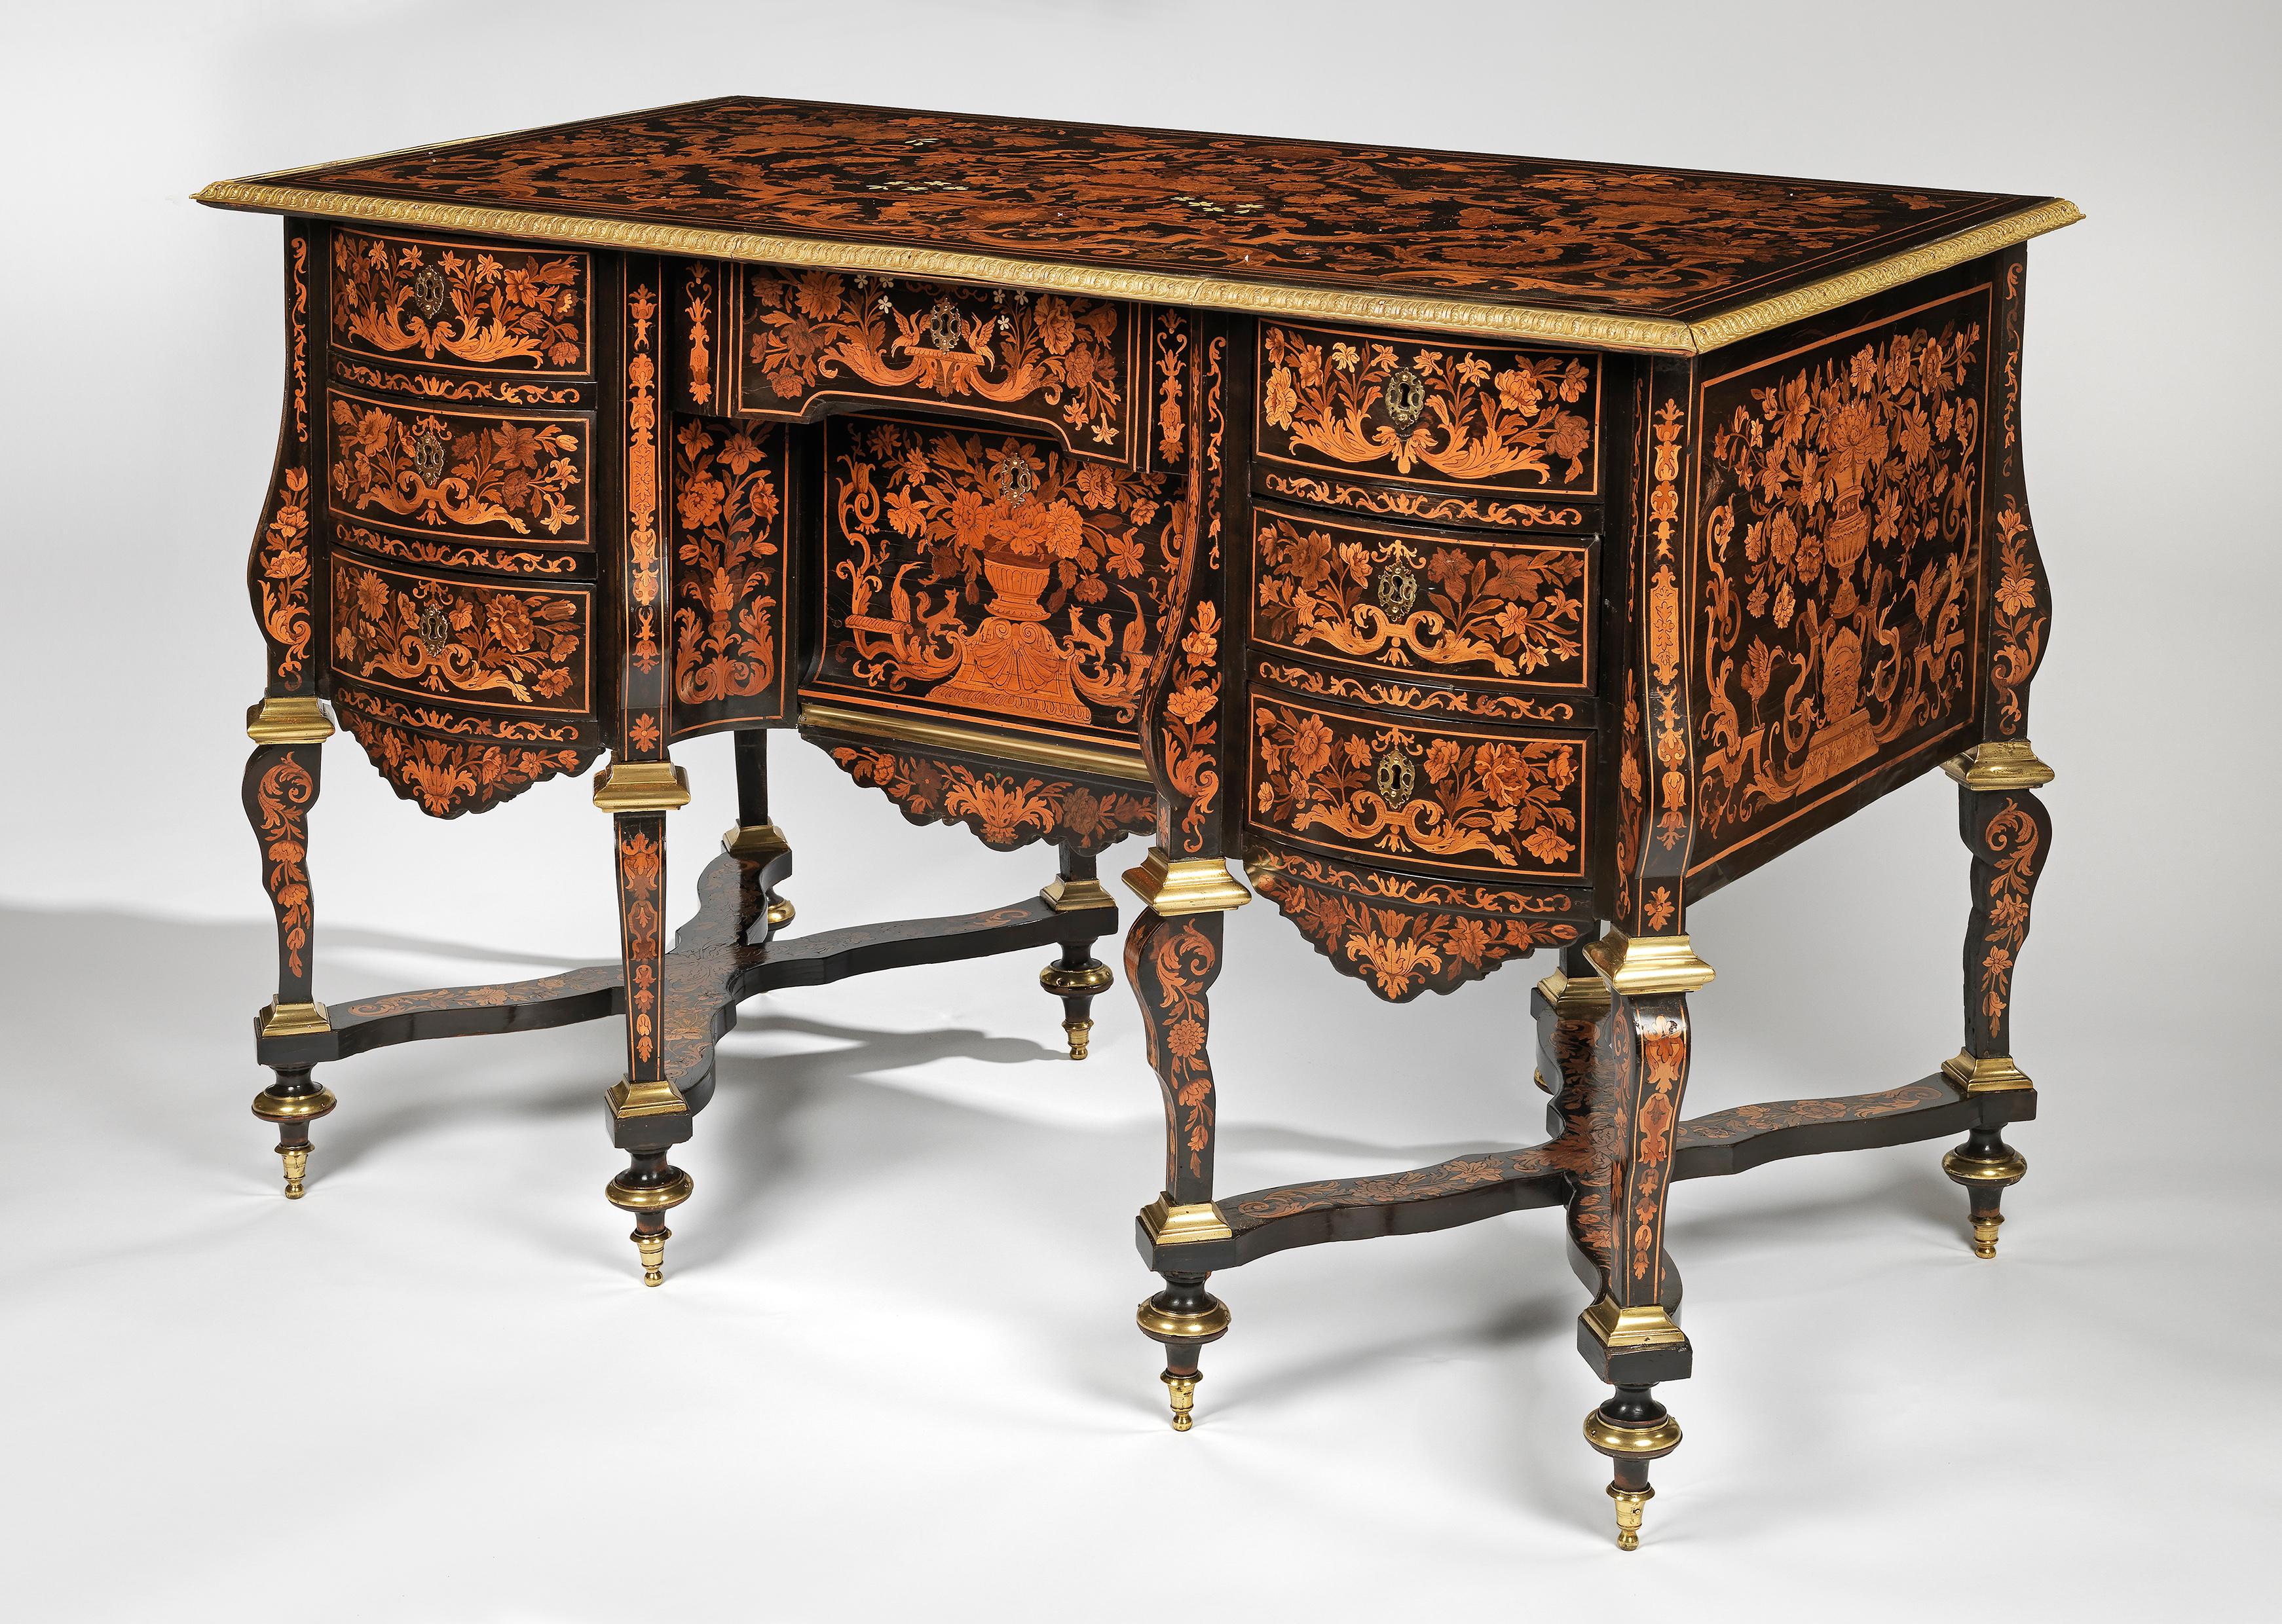 This rectangular bureau inlaid with floral marquetry is raised on eight curved legs of rectangular section, which are connected by two flat, interlaced stretchers. In the middle of the front is a recessed drawer, and to either side are tiers of